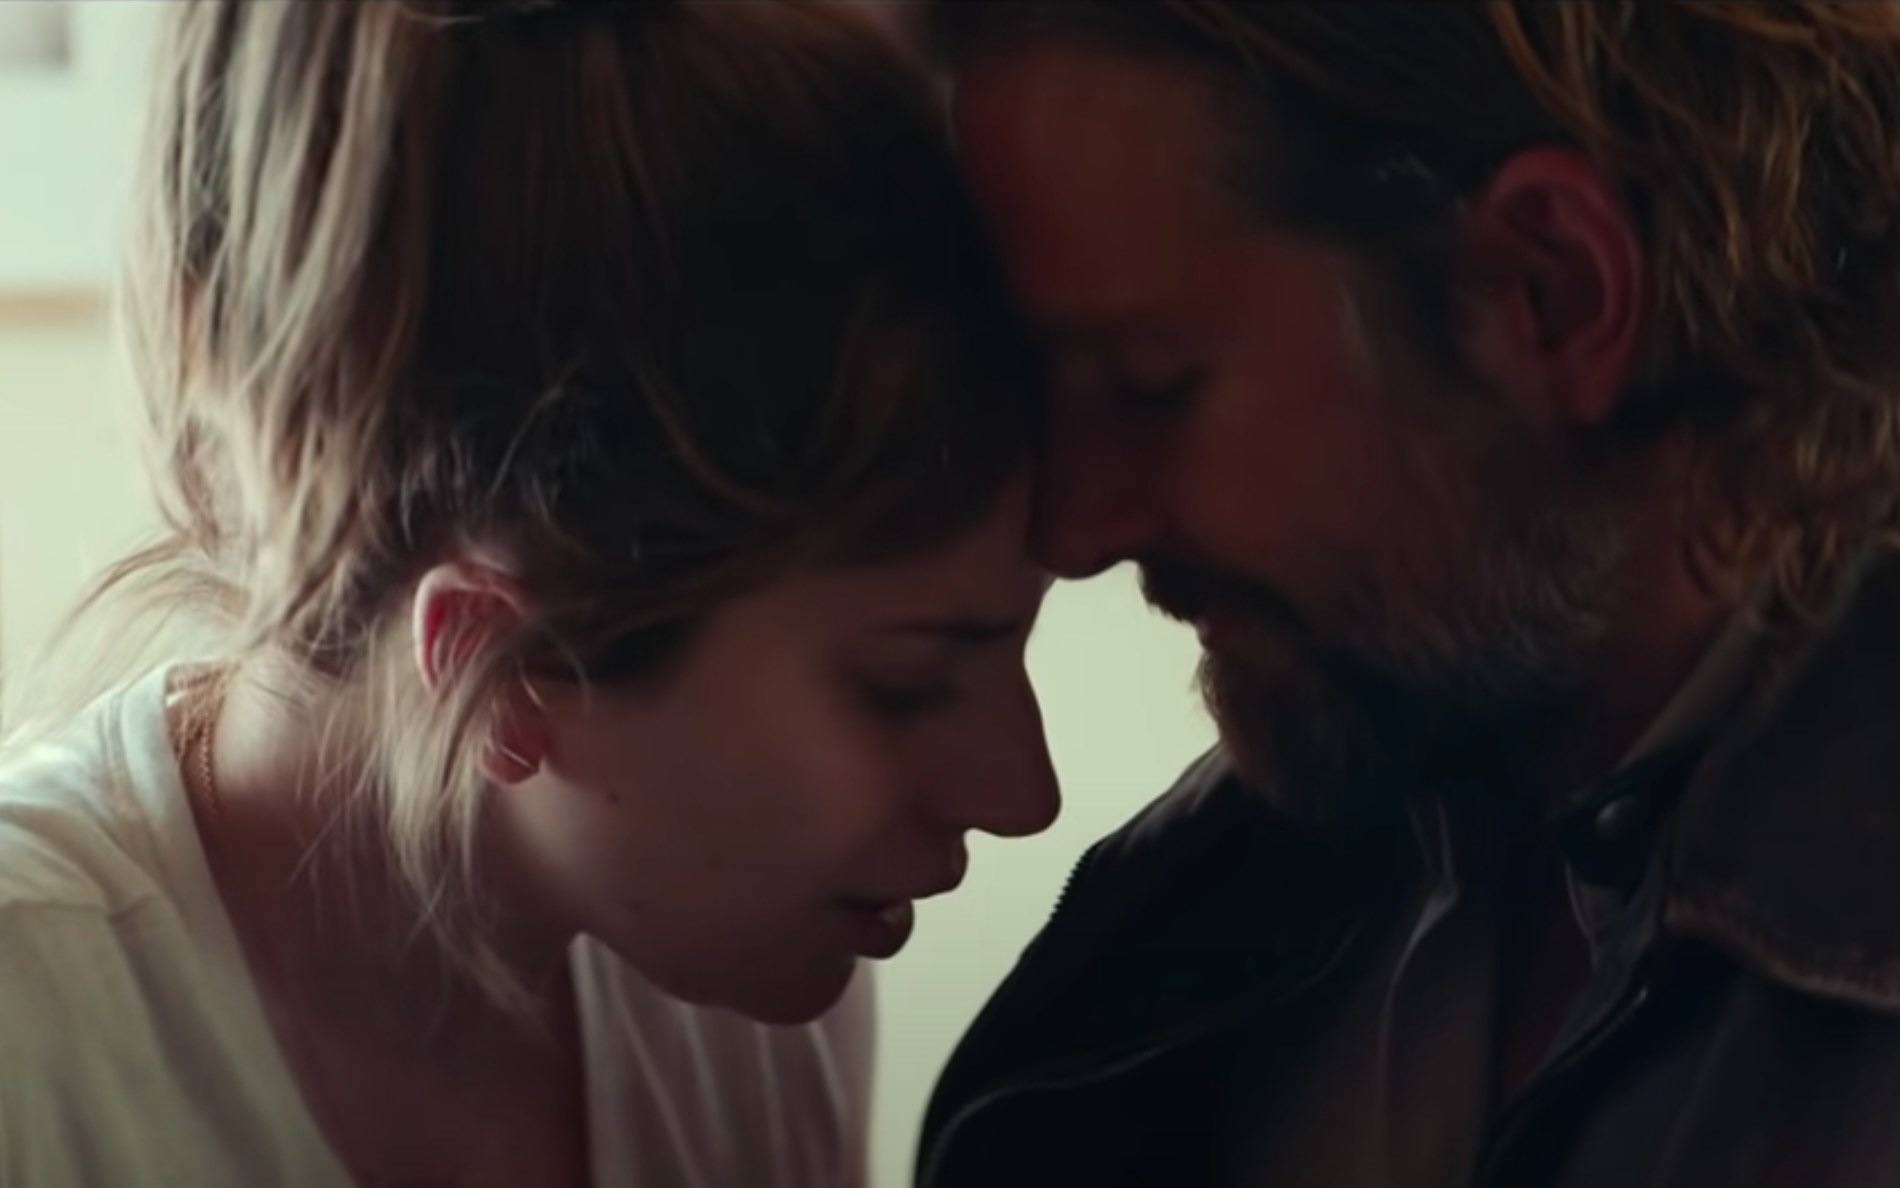 Lady Gaga and Bradley Cooper as Ally and Jack sit together in &quot;A Star Is Born&quot;